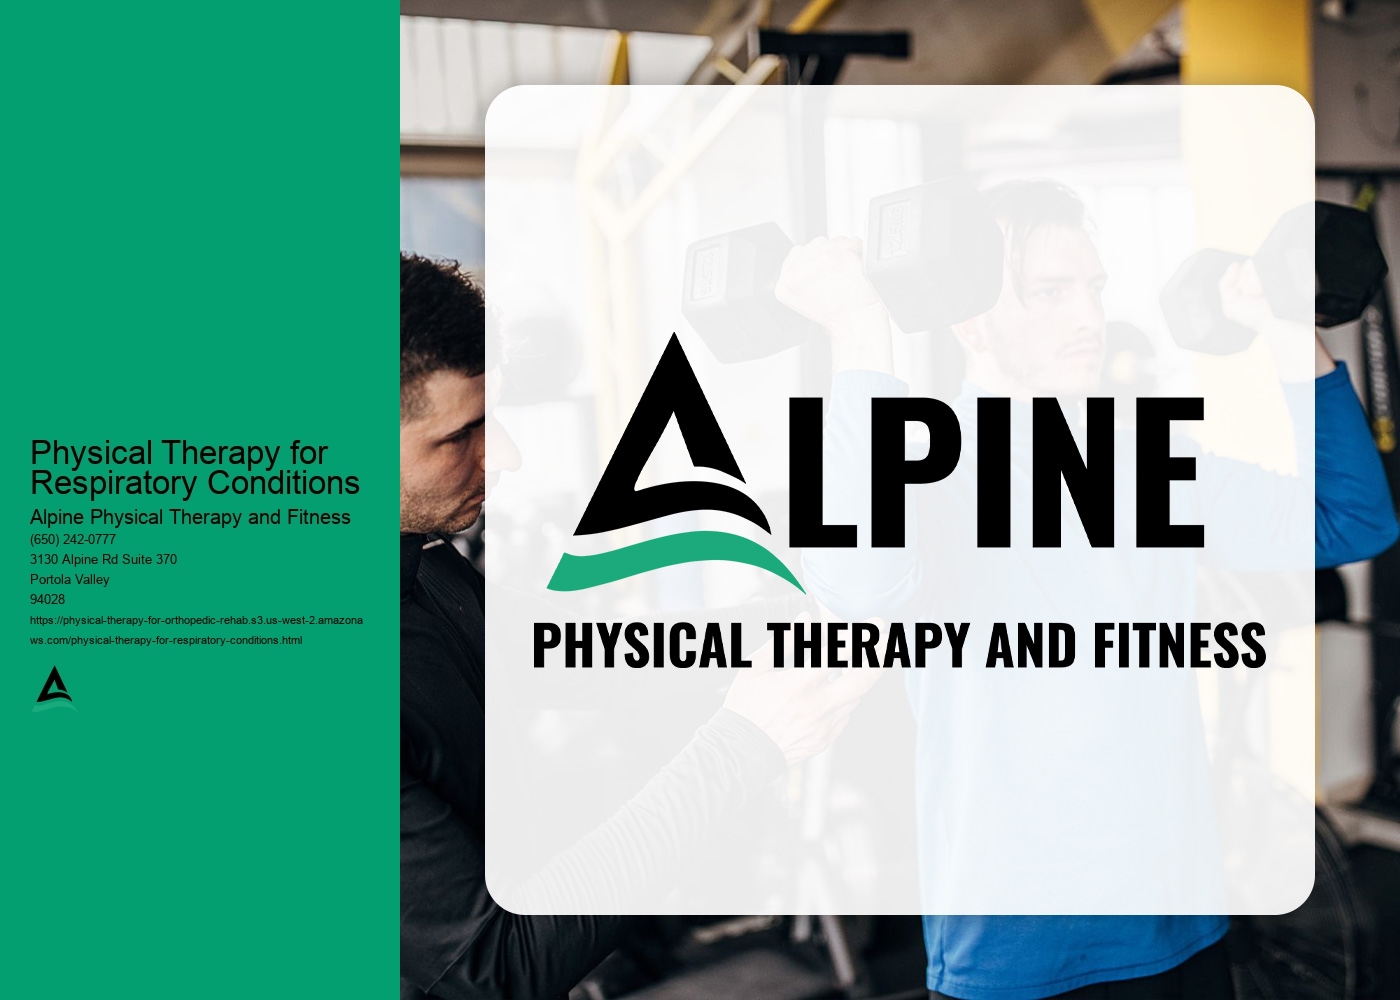 How can physical therapy help individuals with interstitial lung disease improve their exercise tolerance and overall quality of life?